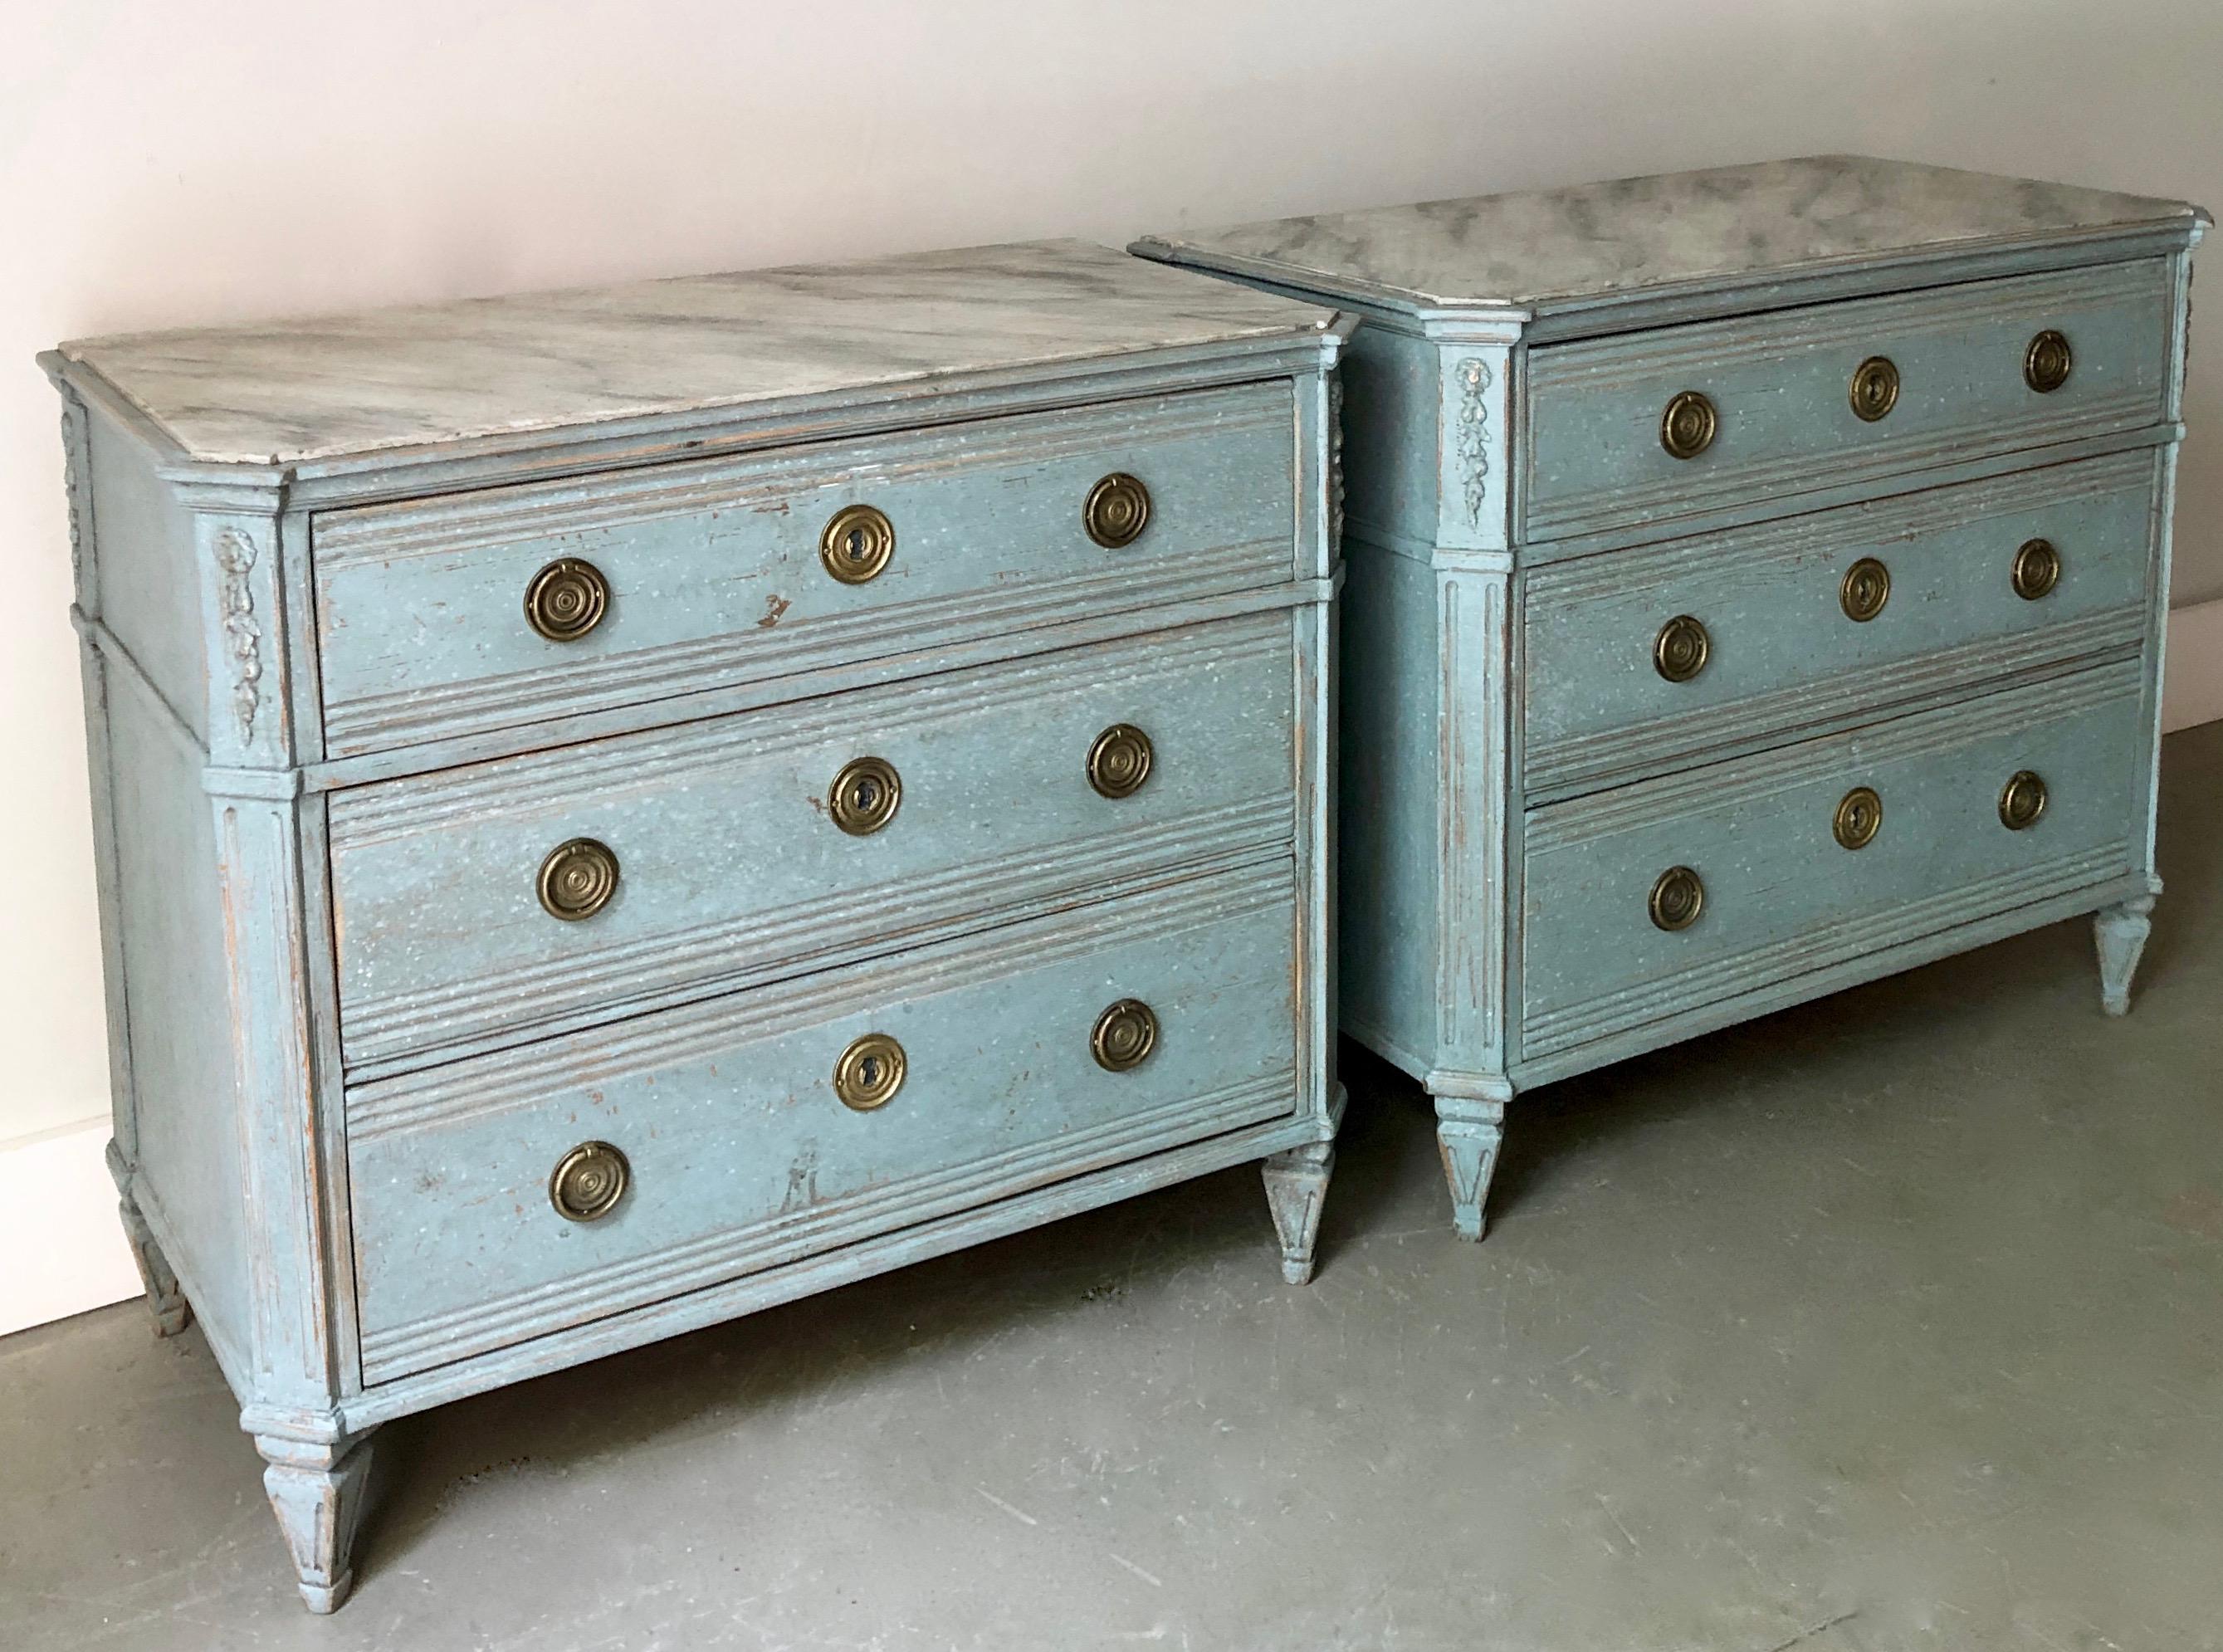 A pair of 19th century Swedish Gustavian style chests with marbleized wooden tops. Drawers with raised panels and bronze hardwares. Canted corner post with dentil molding under the shaped top on tapering reeded and fluted legs. Later light-blue